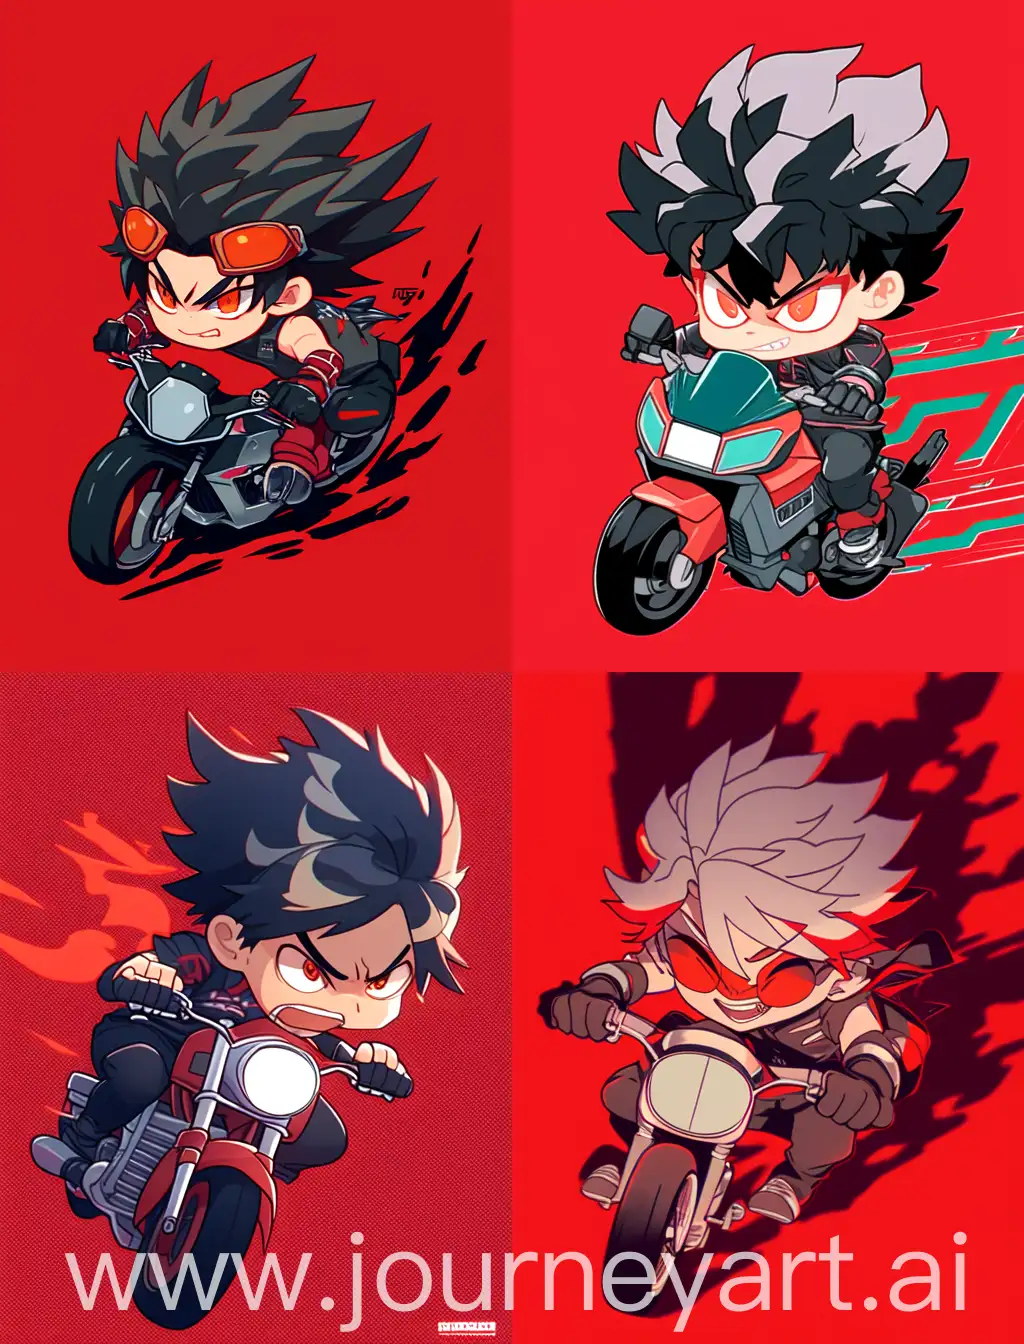 angry chibi anime guy riding a motorcycle, cartoon anime style, with strong lines, with red solid background